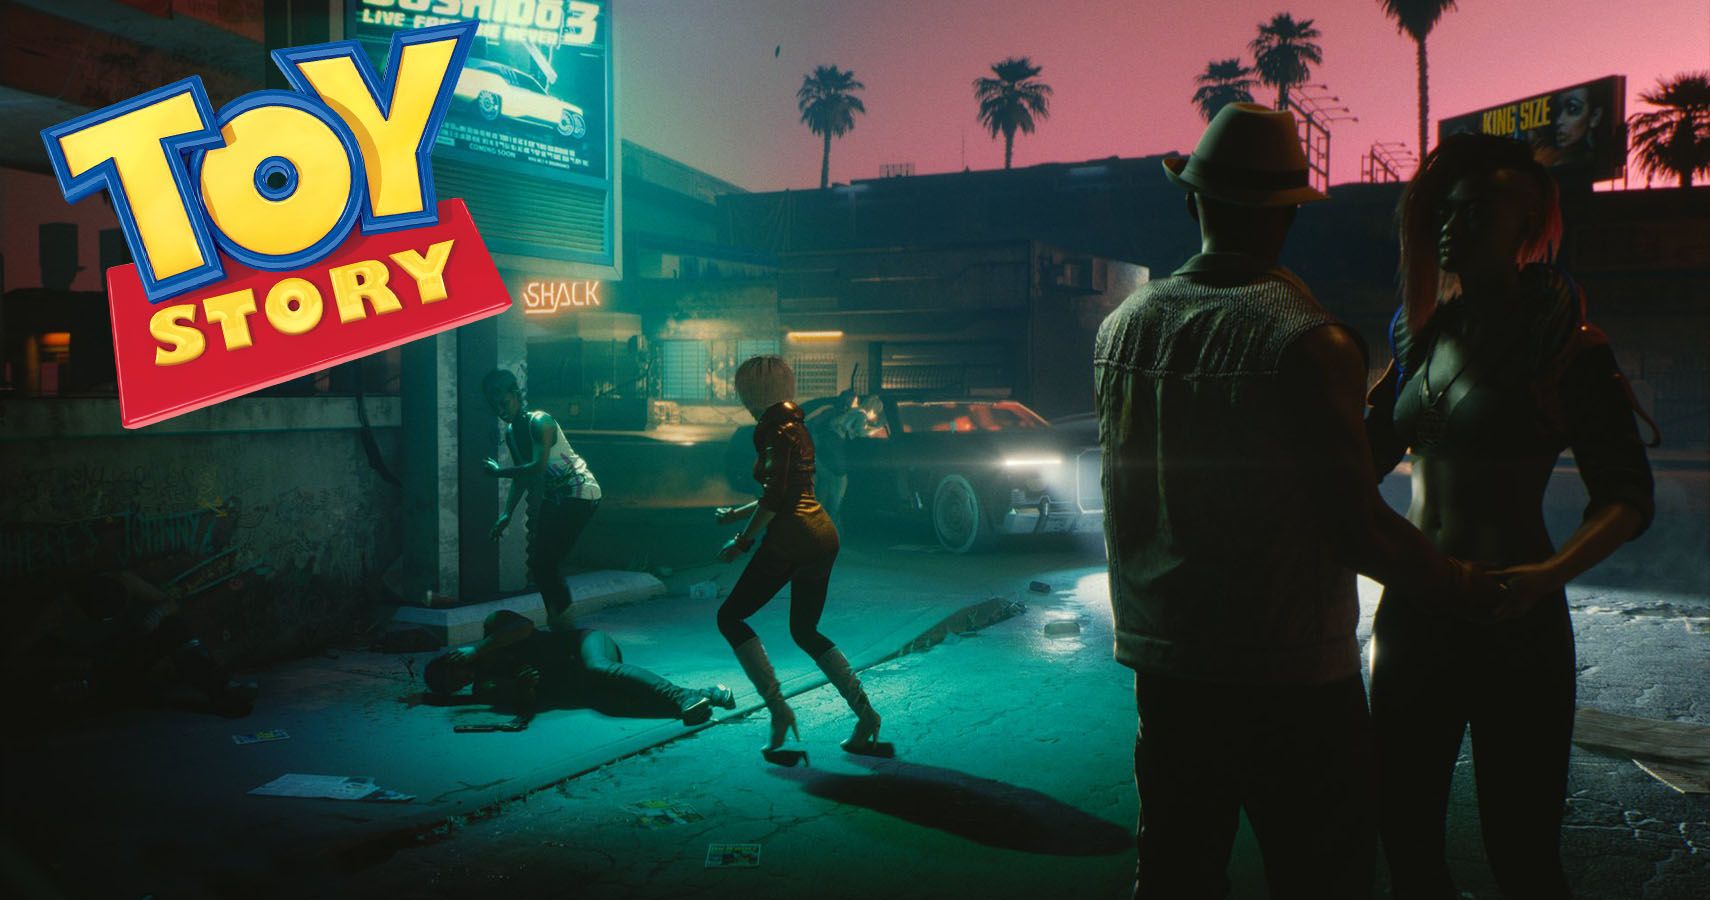 Official Screenshot of Cyberpunk 2077 with Toy Story logo.